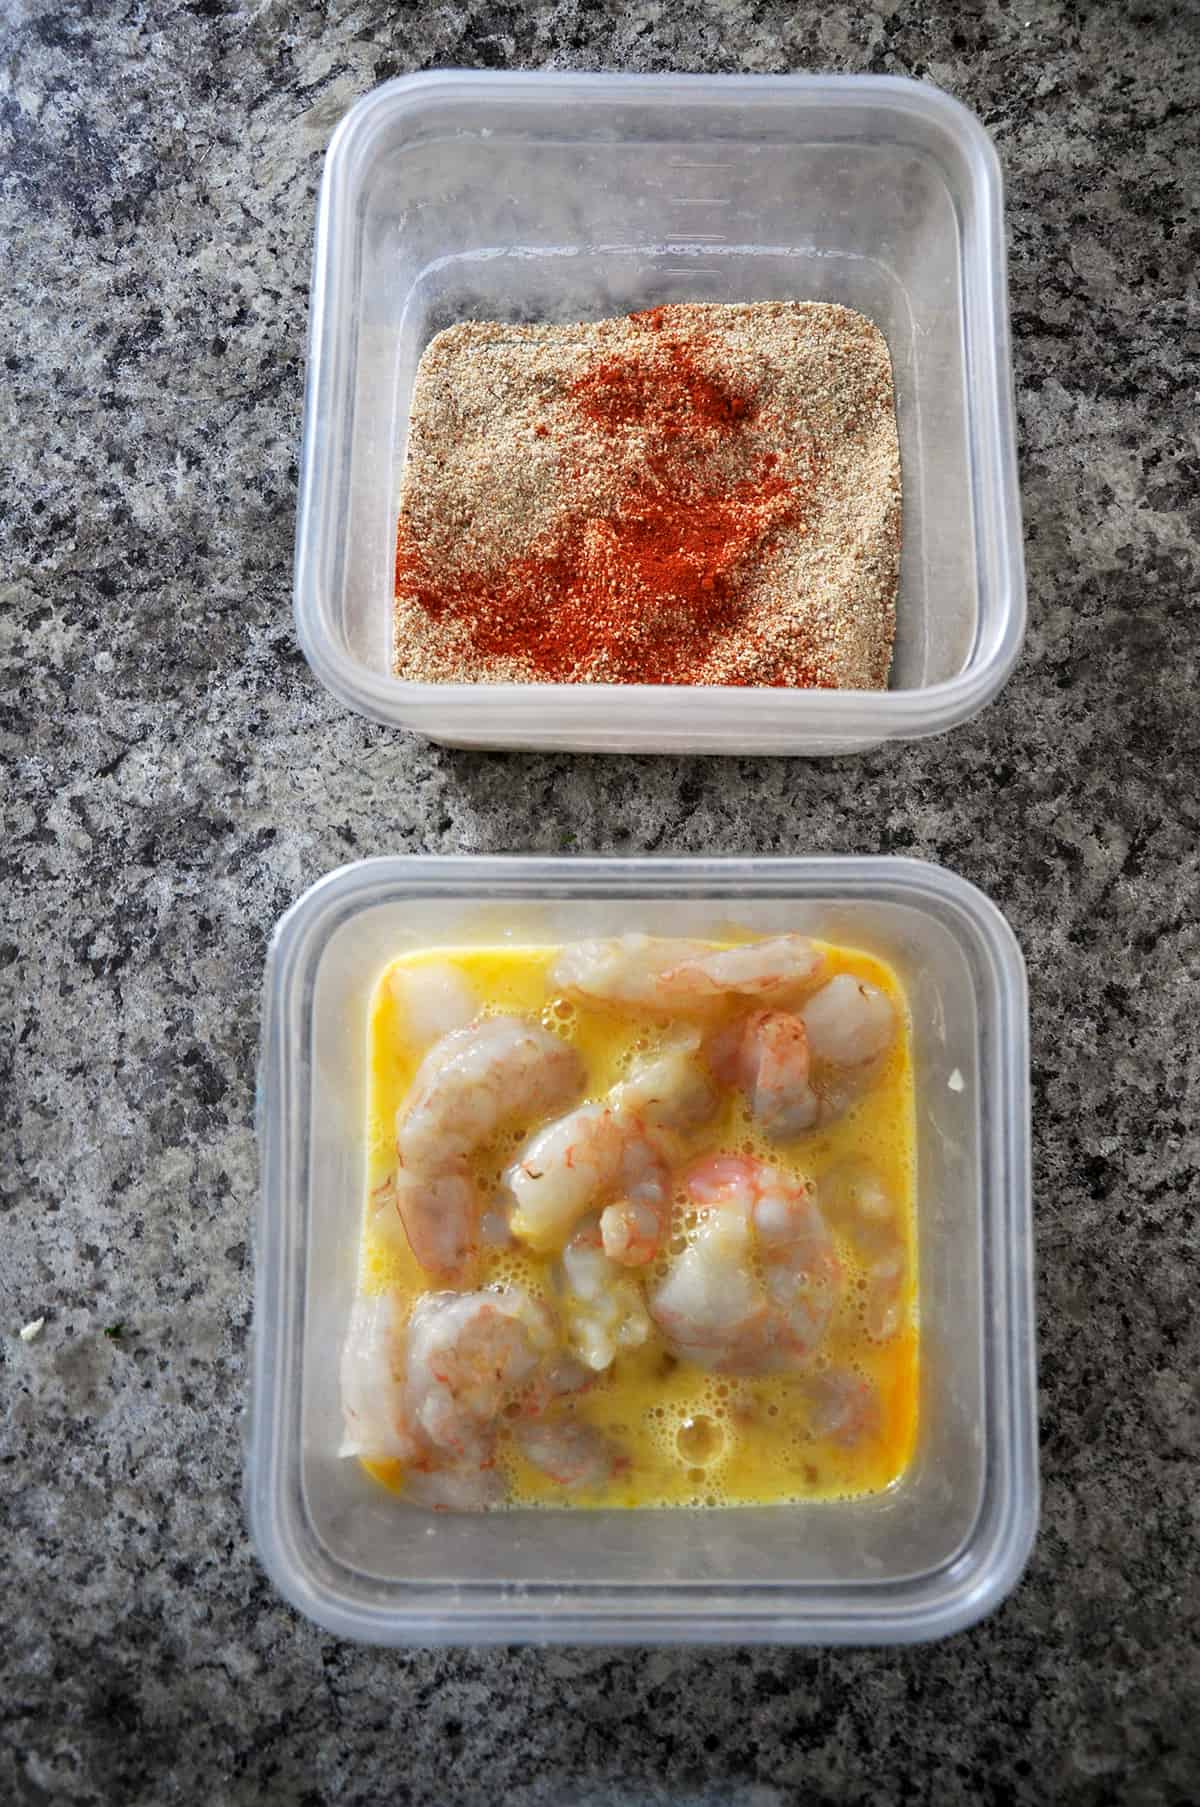 Shrimp in eggs mixture and the breadcrumb coating in a different dish.